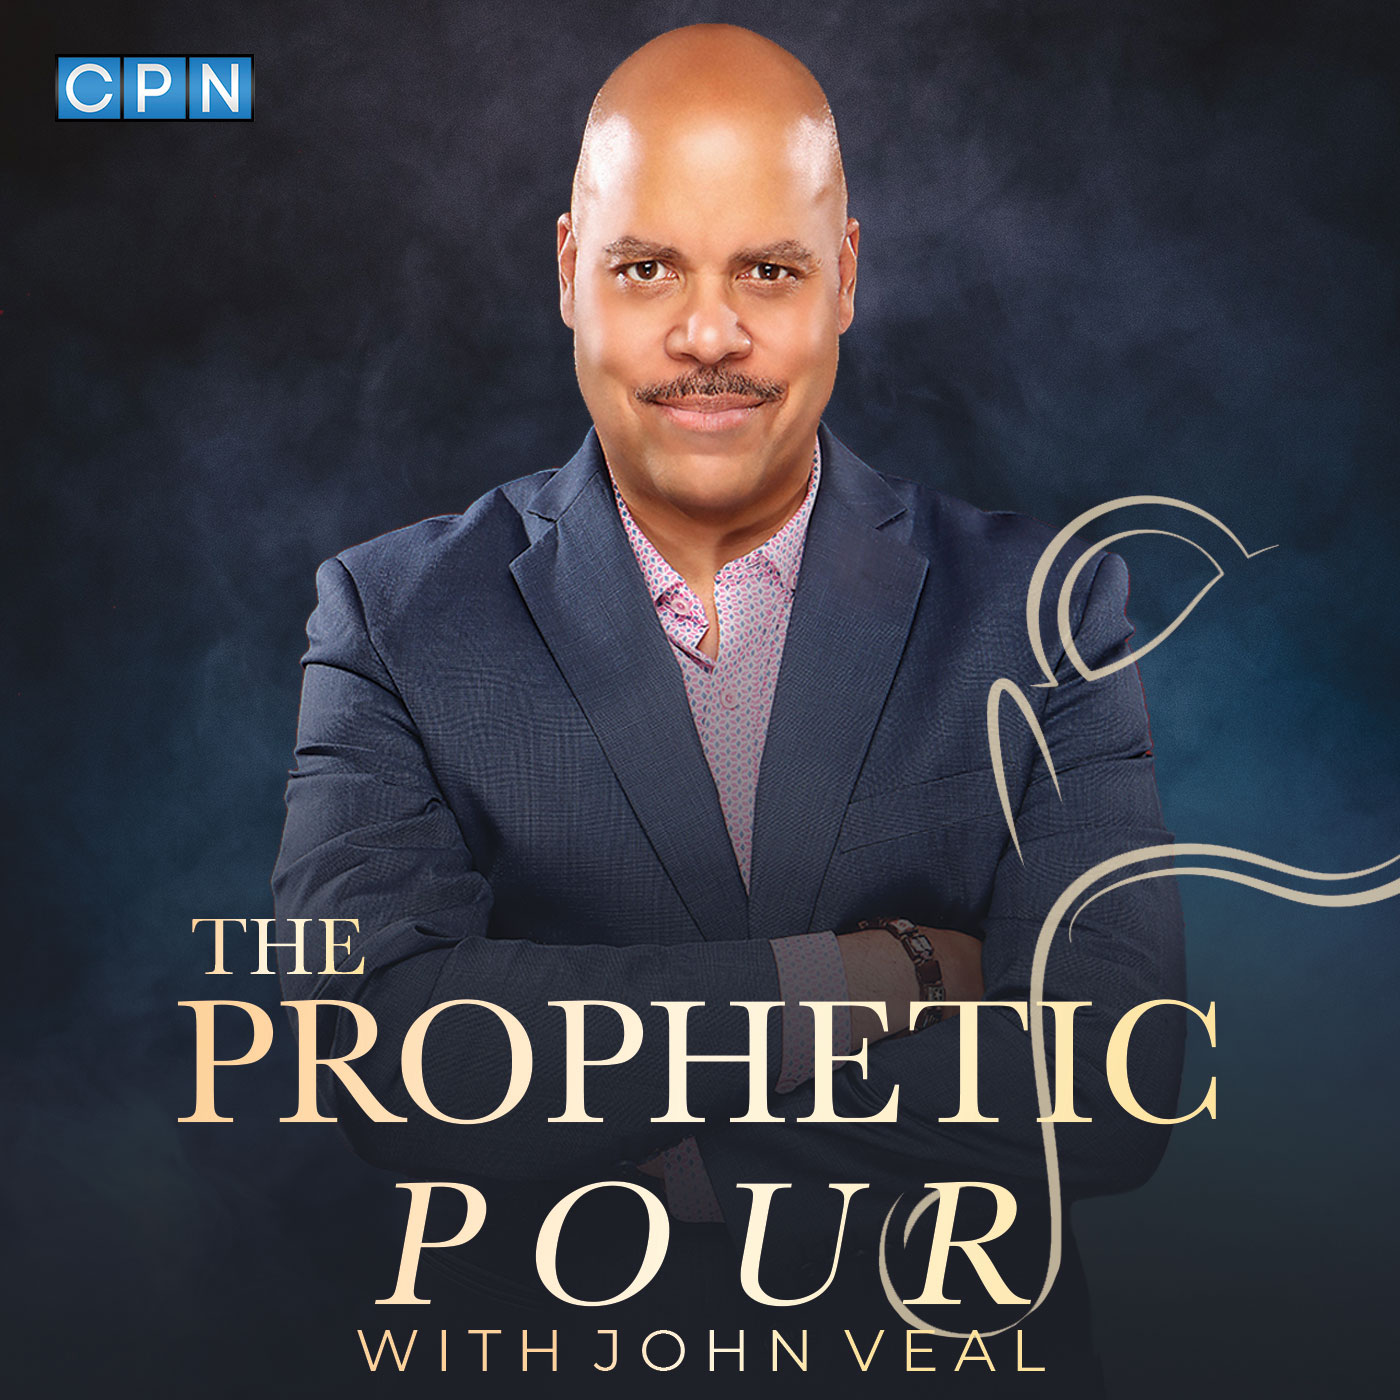 The Devil Knows Your Name! Pt. 2 Was The Prophetic Word That You Received Really From God?